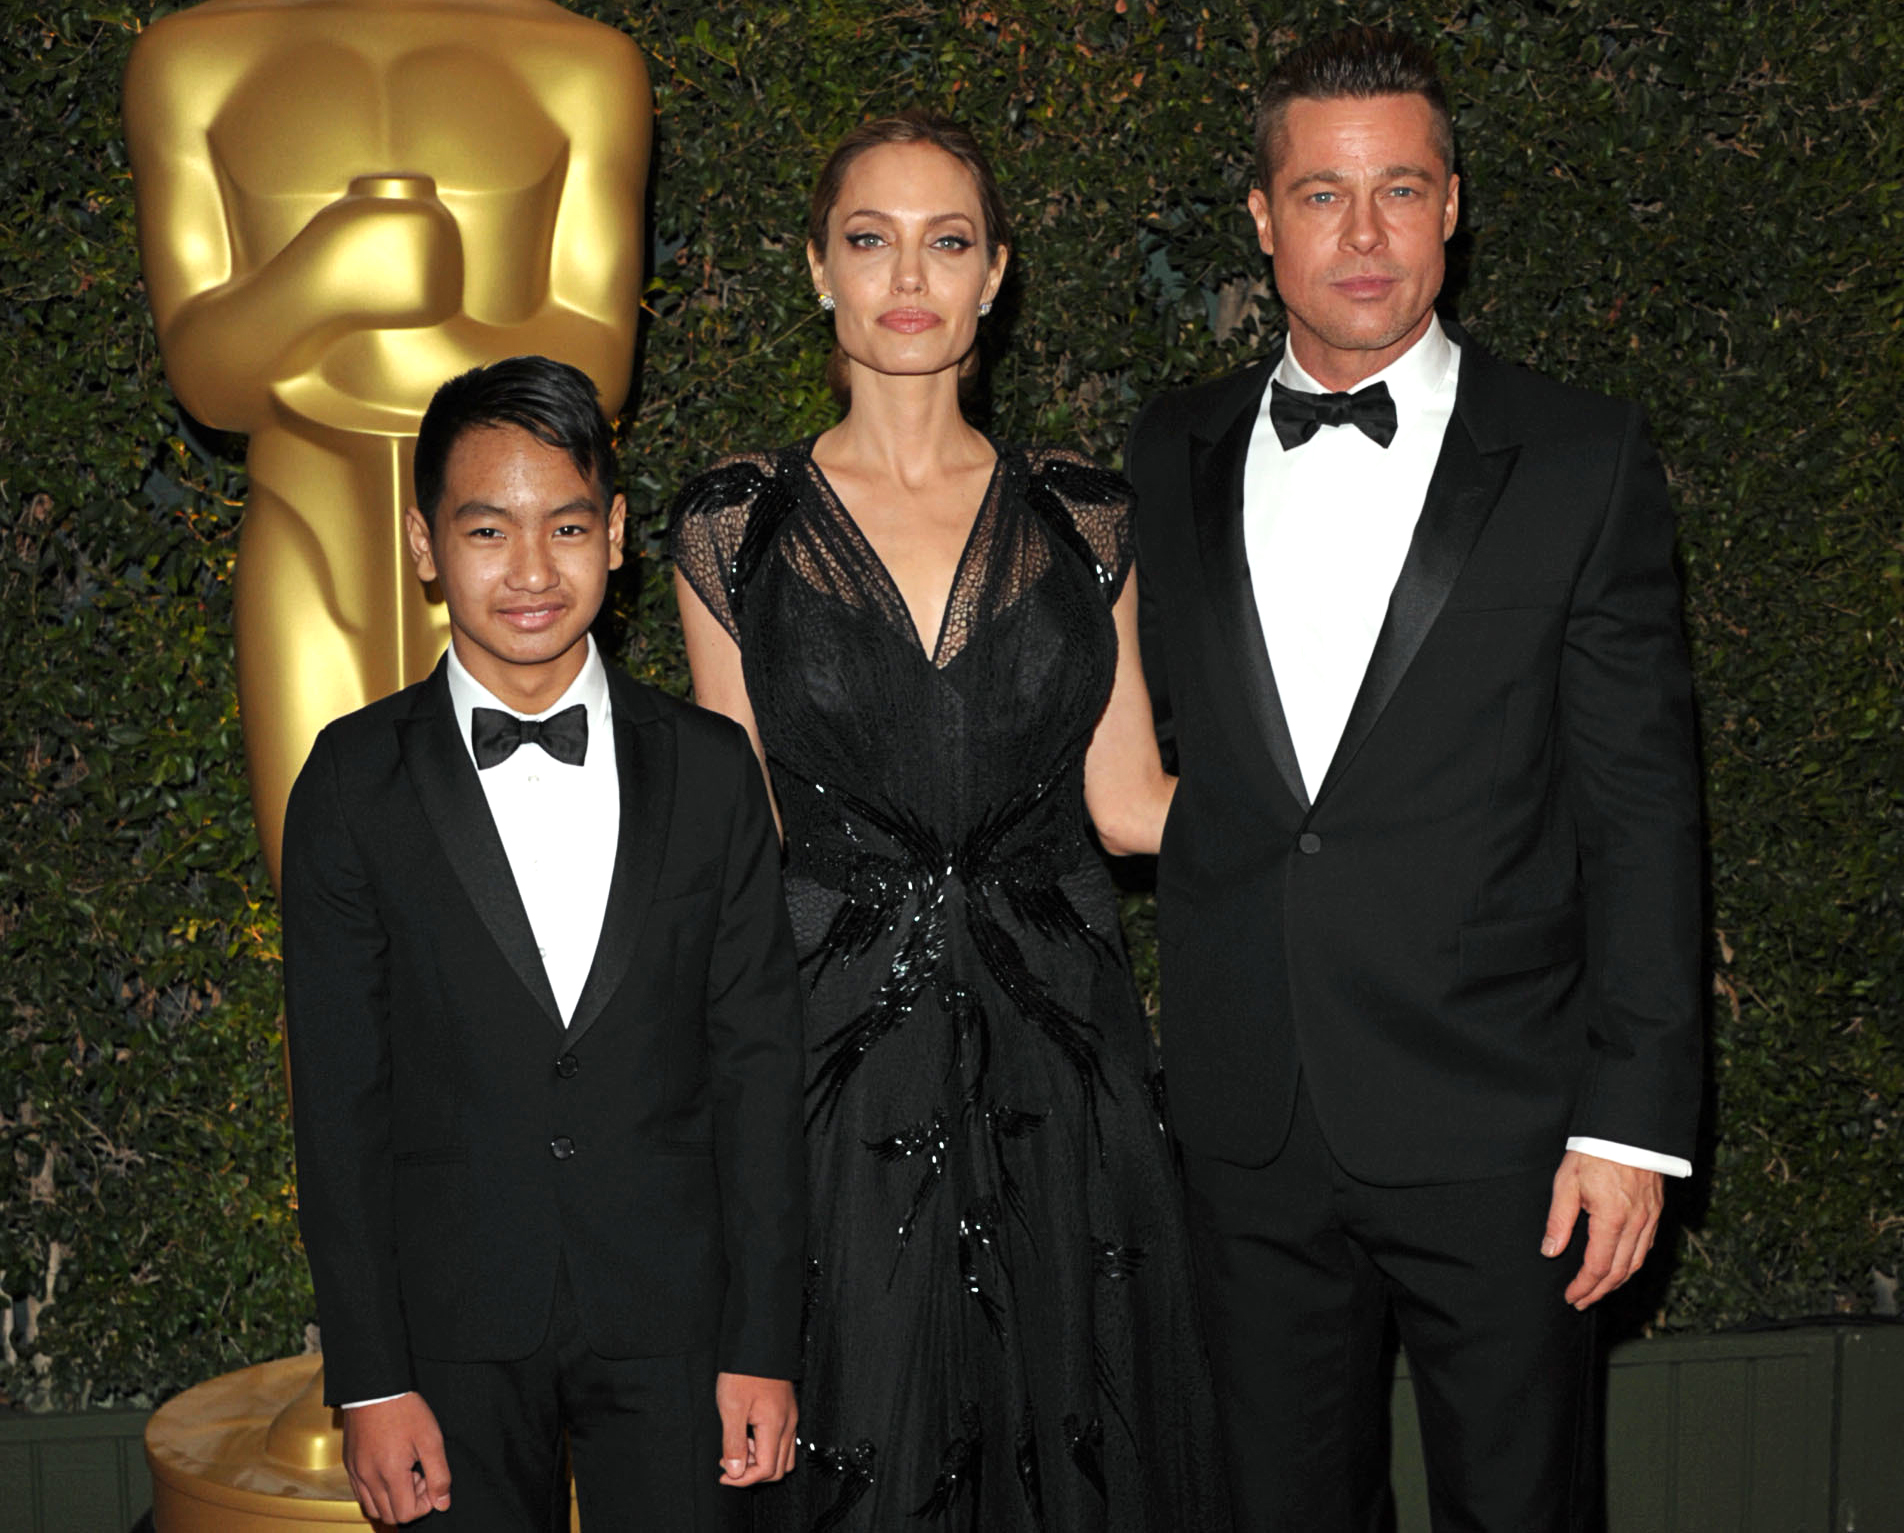 Maddox Jolie-Pitt'S Transformation Over The Years: Photos